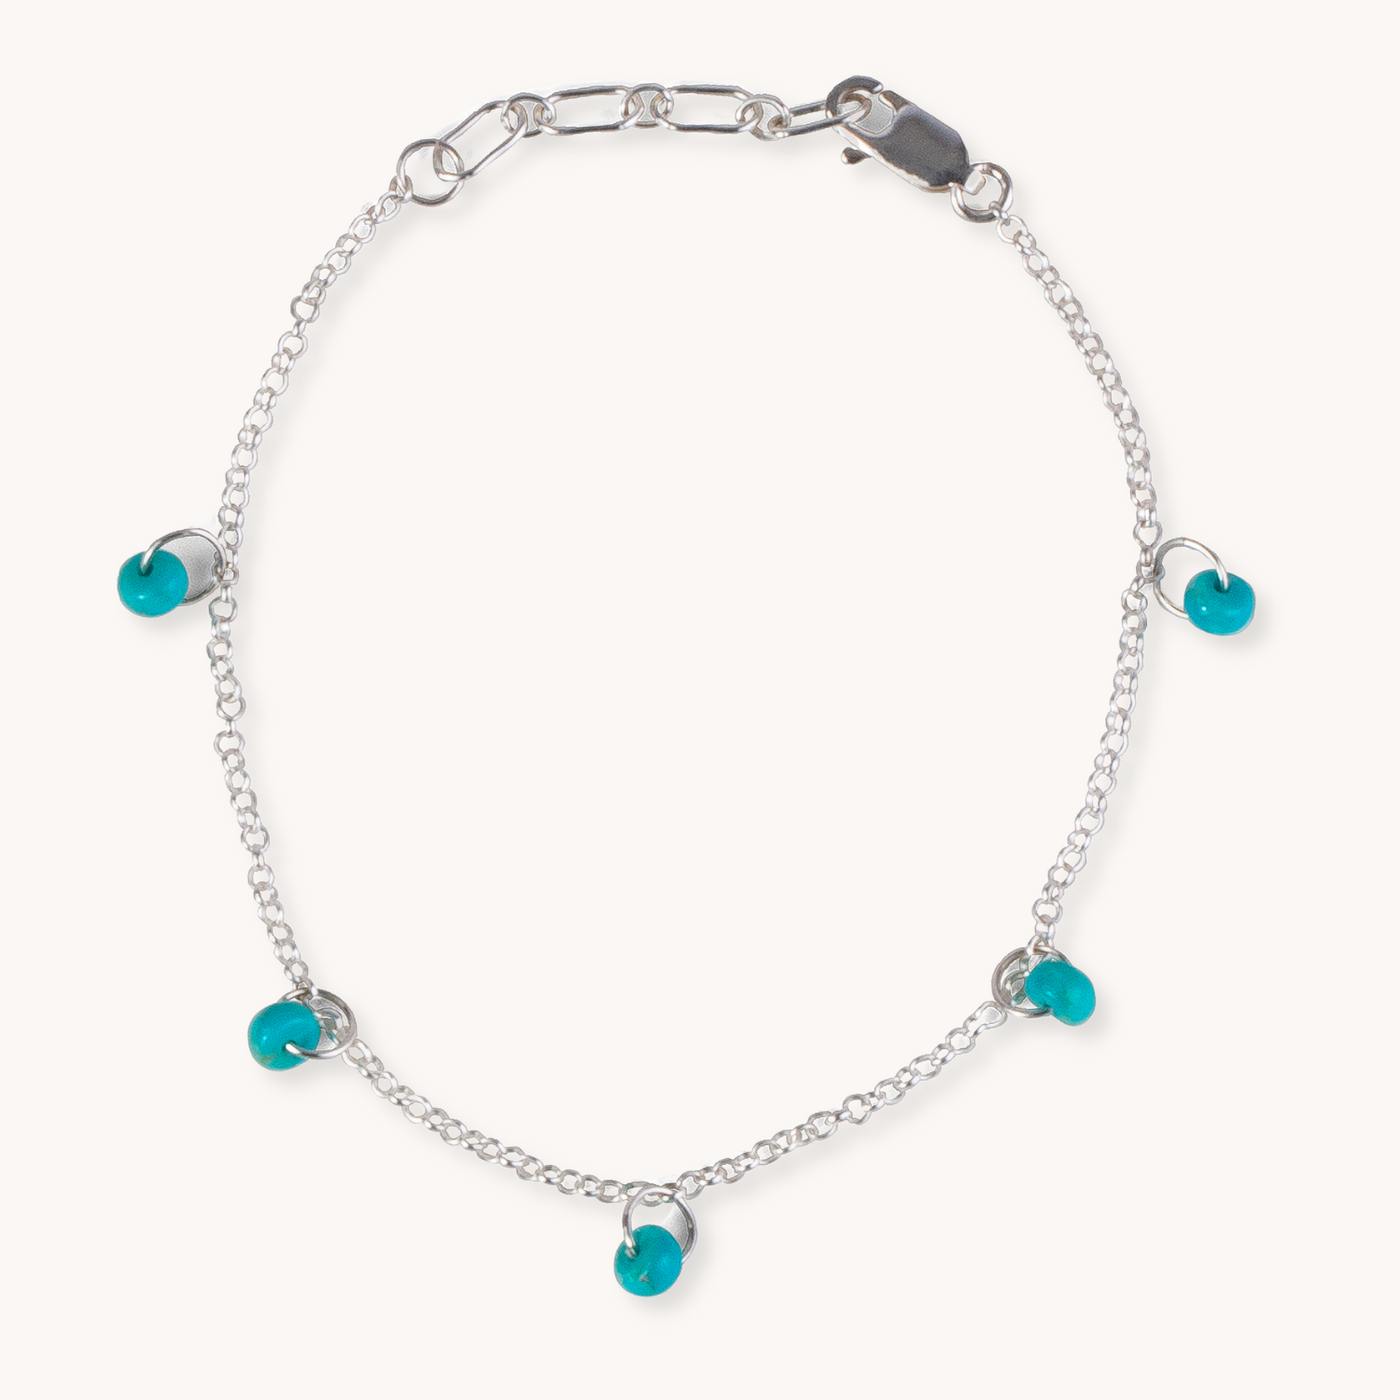 Turquoise and Silver Bracelet by TSkies